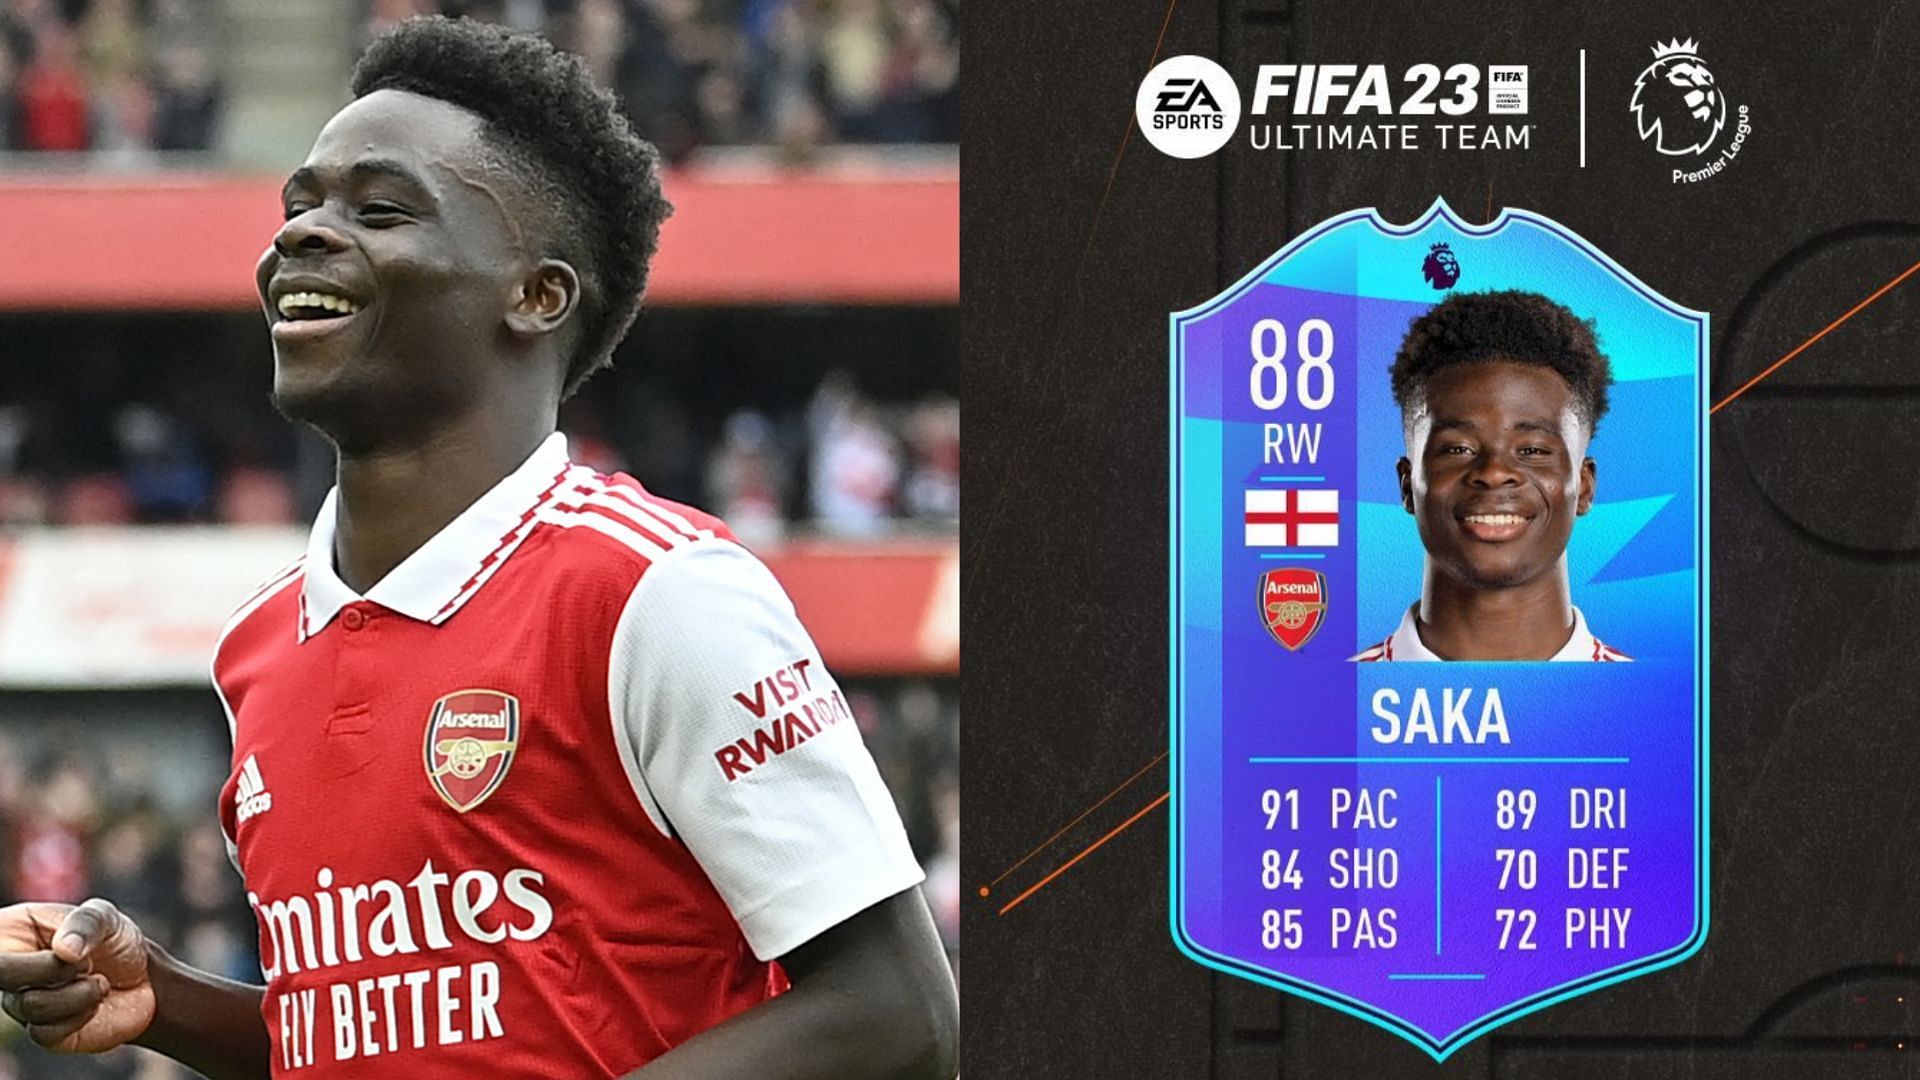 FIFA 23 players can greatly improve their squads by completing the Bukayo Saka Premier League POTM SBC (Images via Getty, EA Sports)